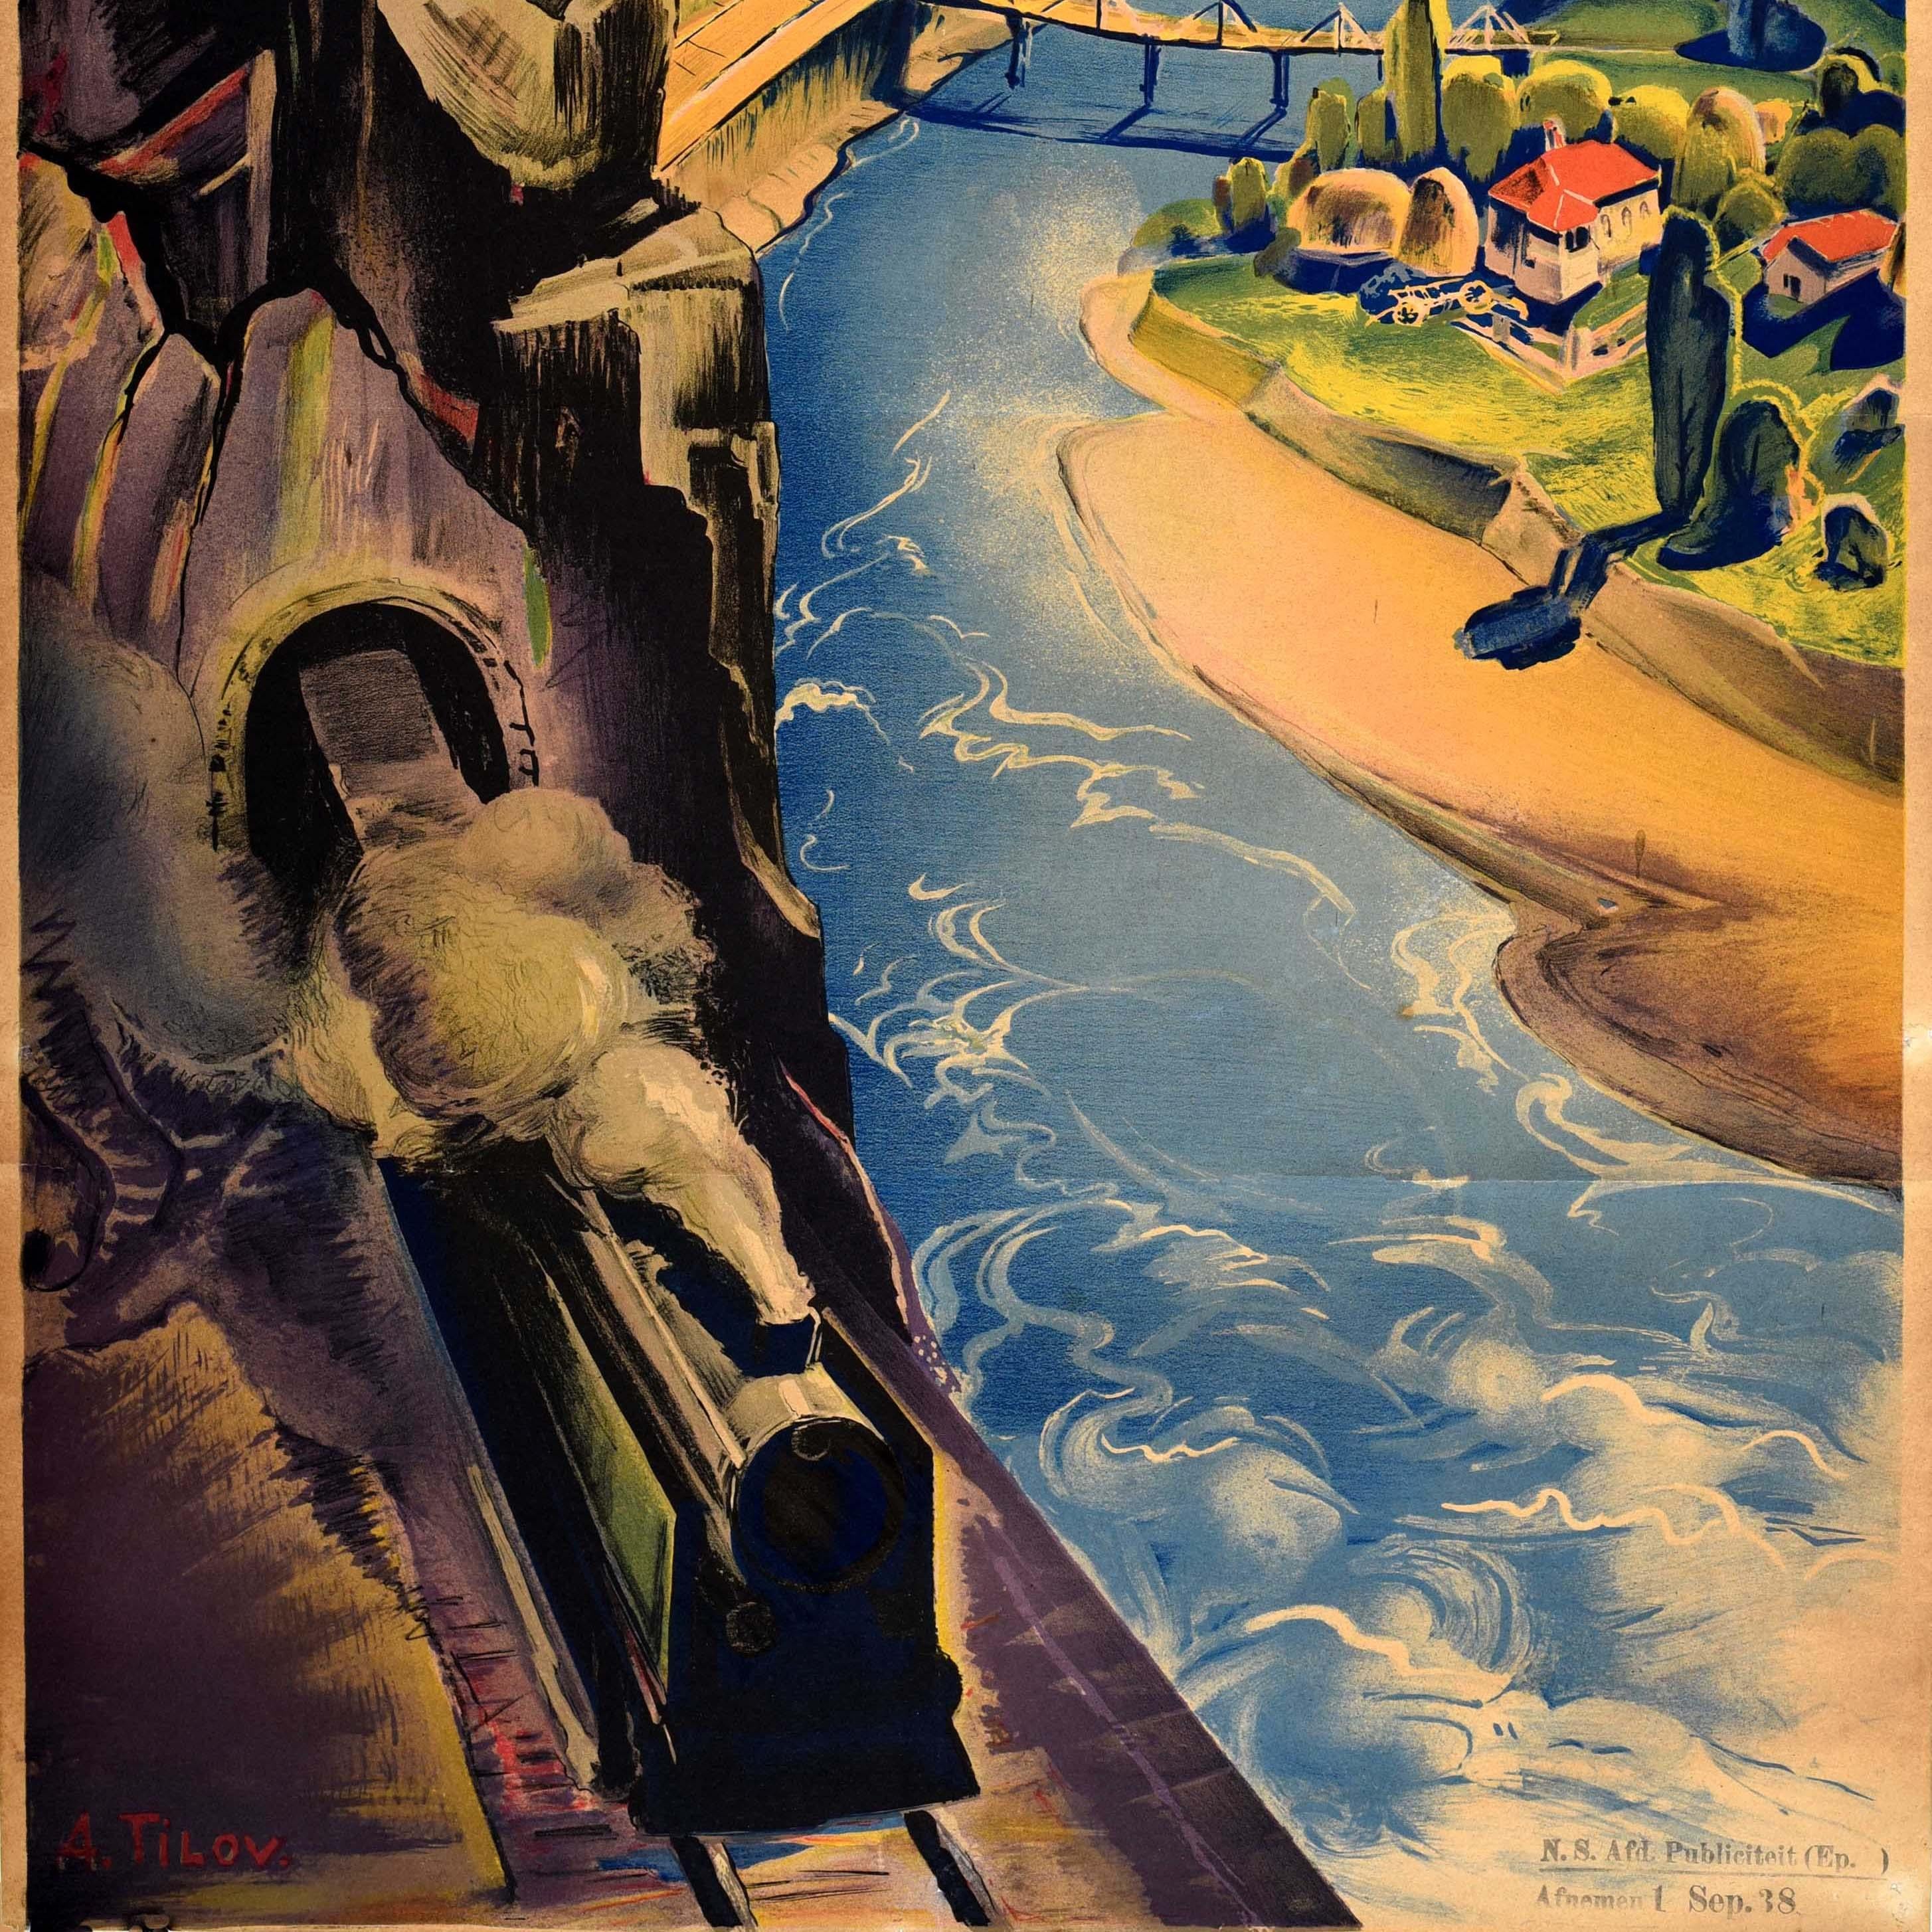 Original vintage travel poster for Bulgaria featuring a scenic view of a steam train travelling through a tunnel on a rocky cliff above a river with a bridge linking a riverside town to the railway and trees and mountains in the distance. Artwork by